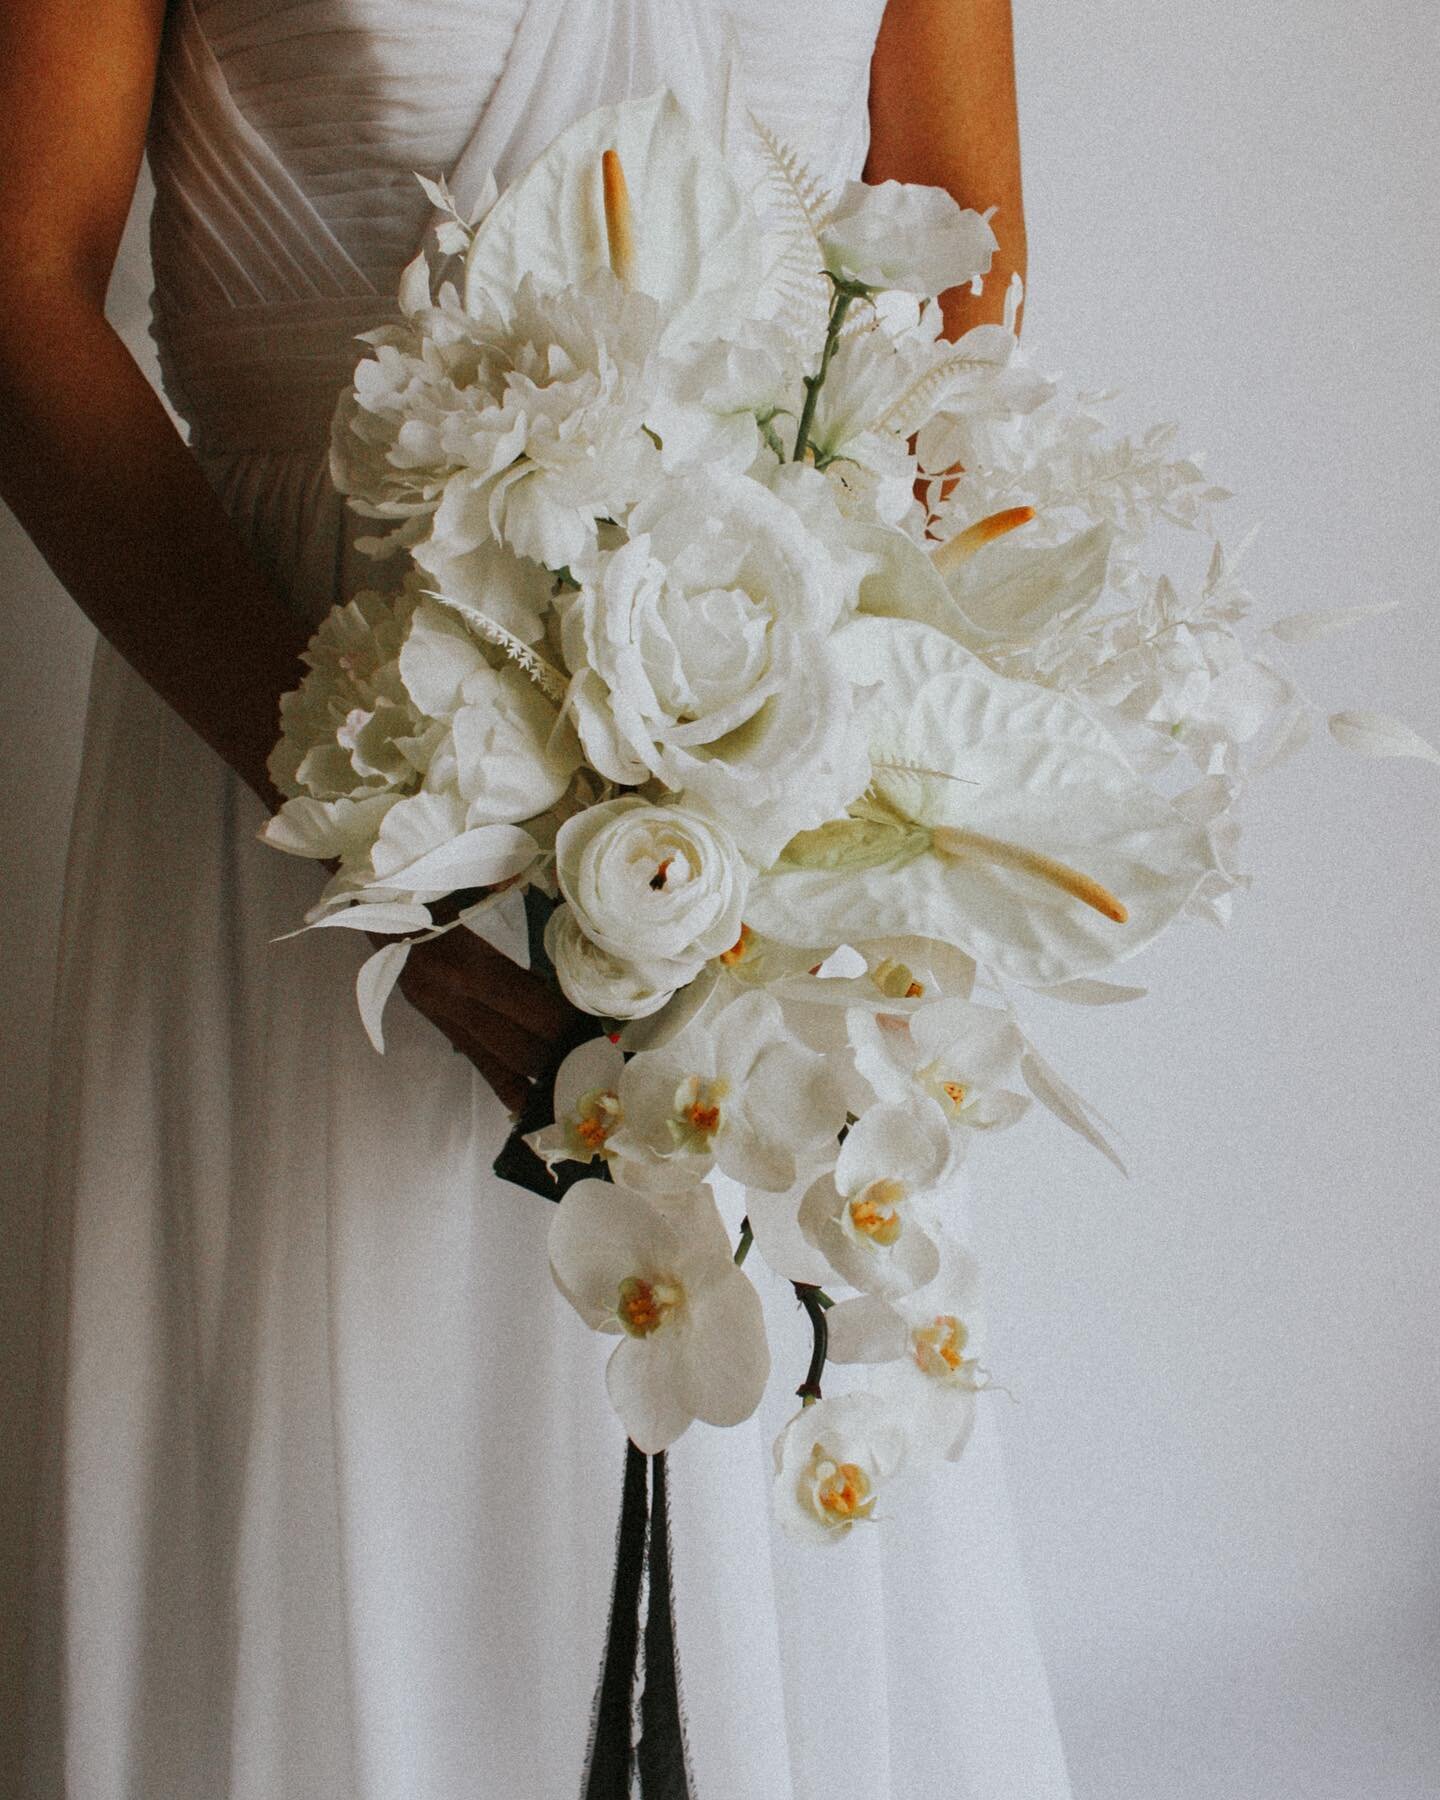 How about this all white cascade bouquet designed with all the good stuff? ANTHURIUMS, PHALAENOPSIS, RANUNCULUS, PEONIES, SWEET PEAS and more! Best part- all artificial/ preserved so you can keep forever 🤍